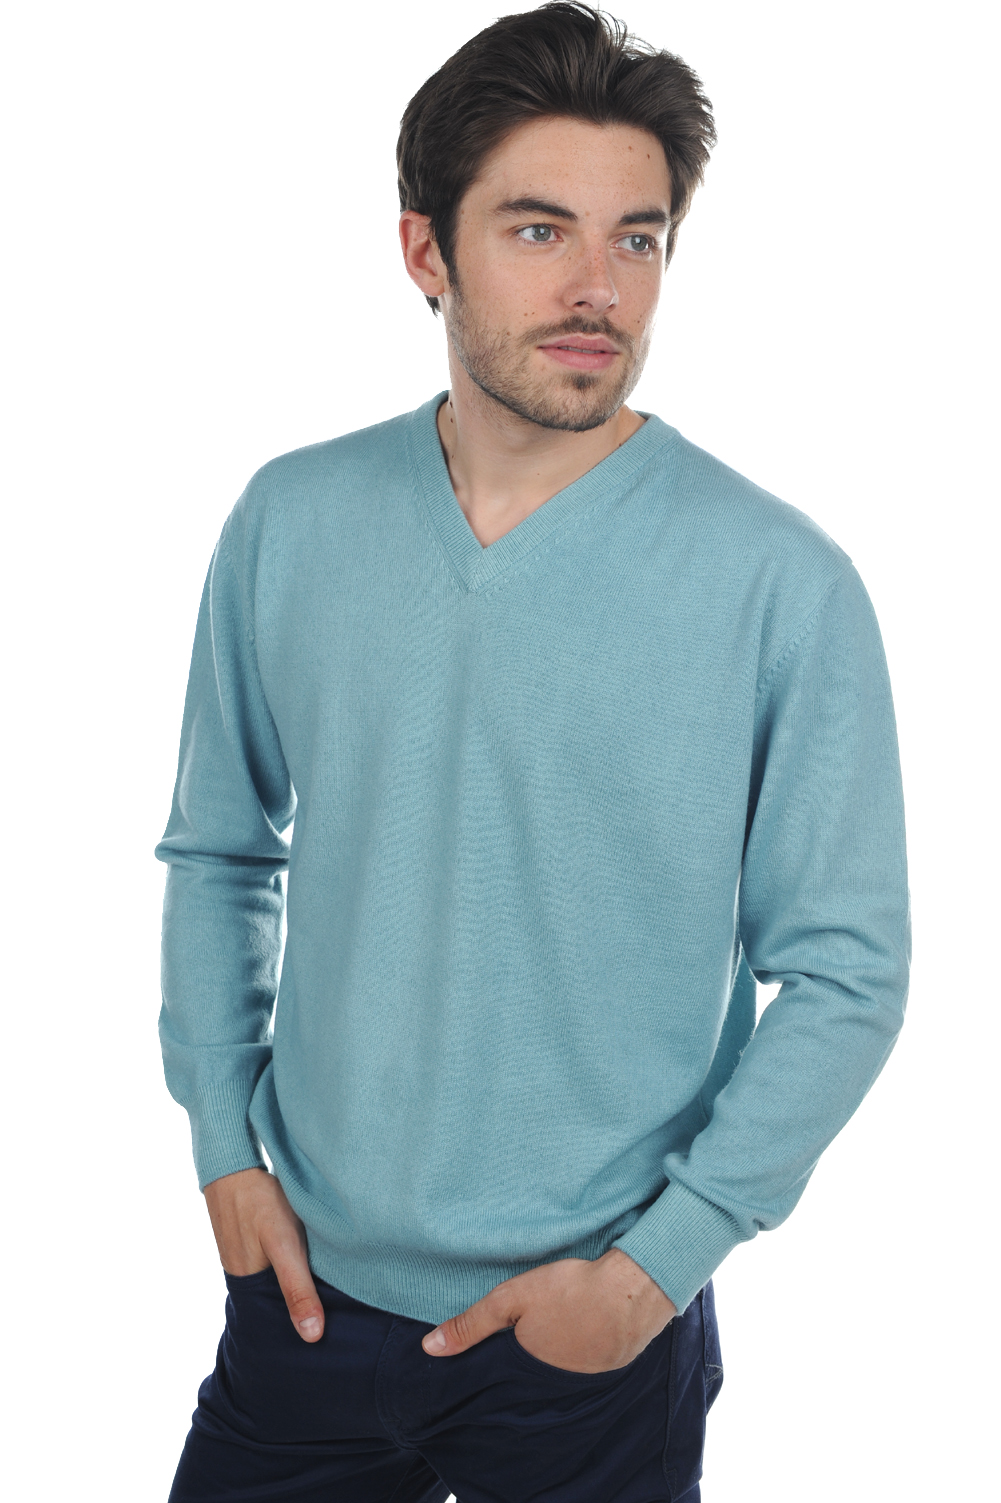 Cachemire pull homme col v gaspard tourmaline s